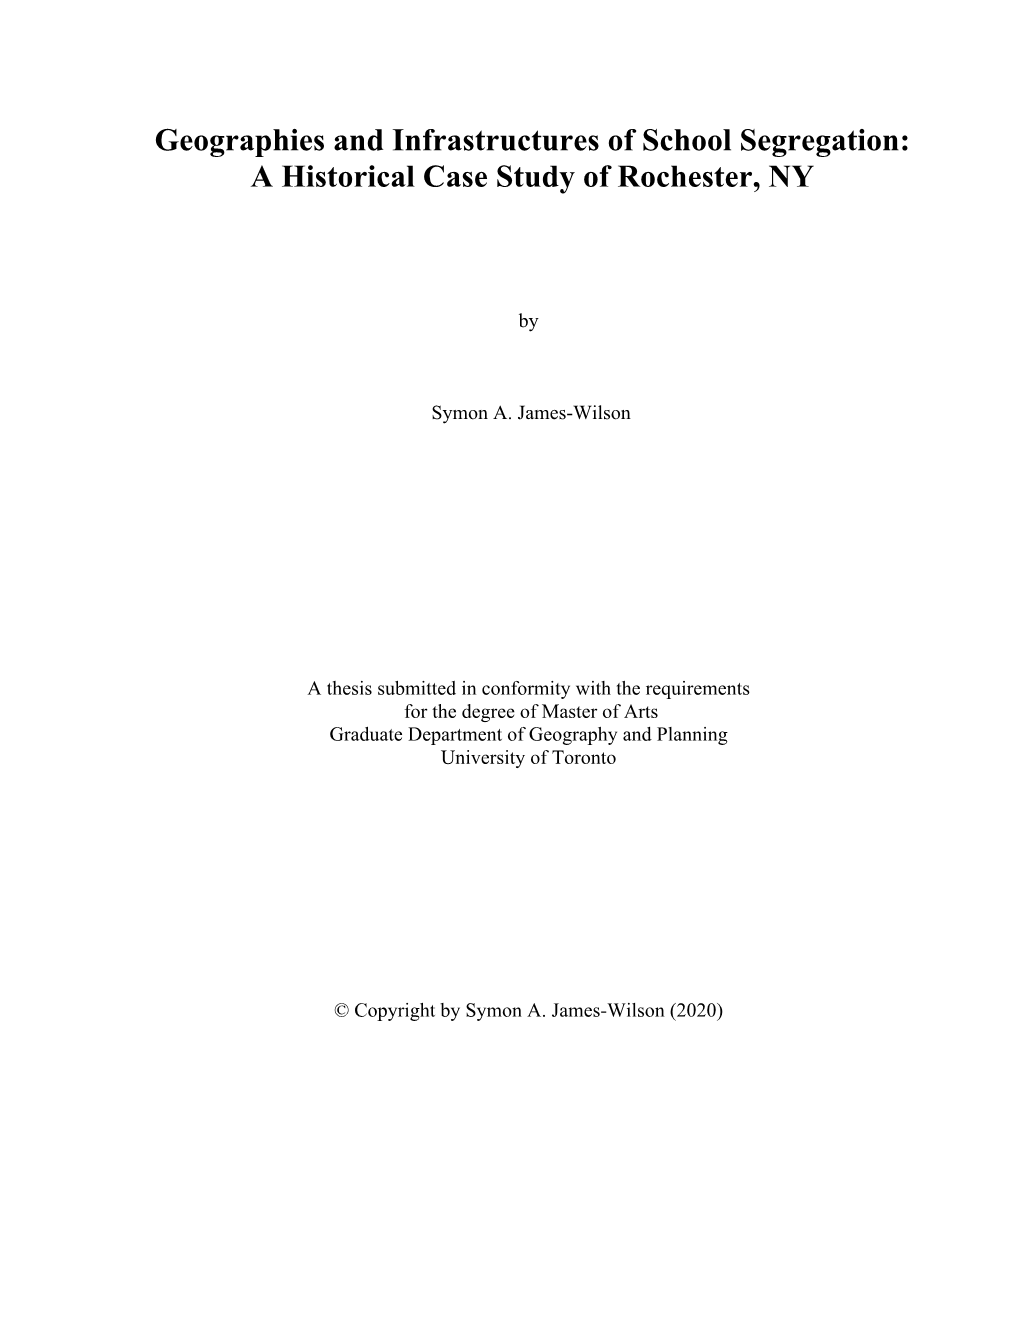 Geographies and Infrastructures of School Segregation: a Historical Case Study of Rochester, NY